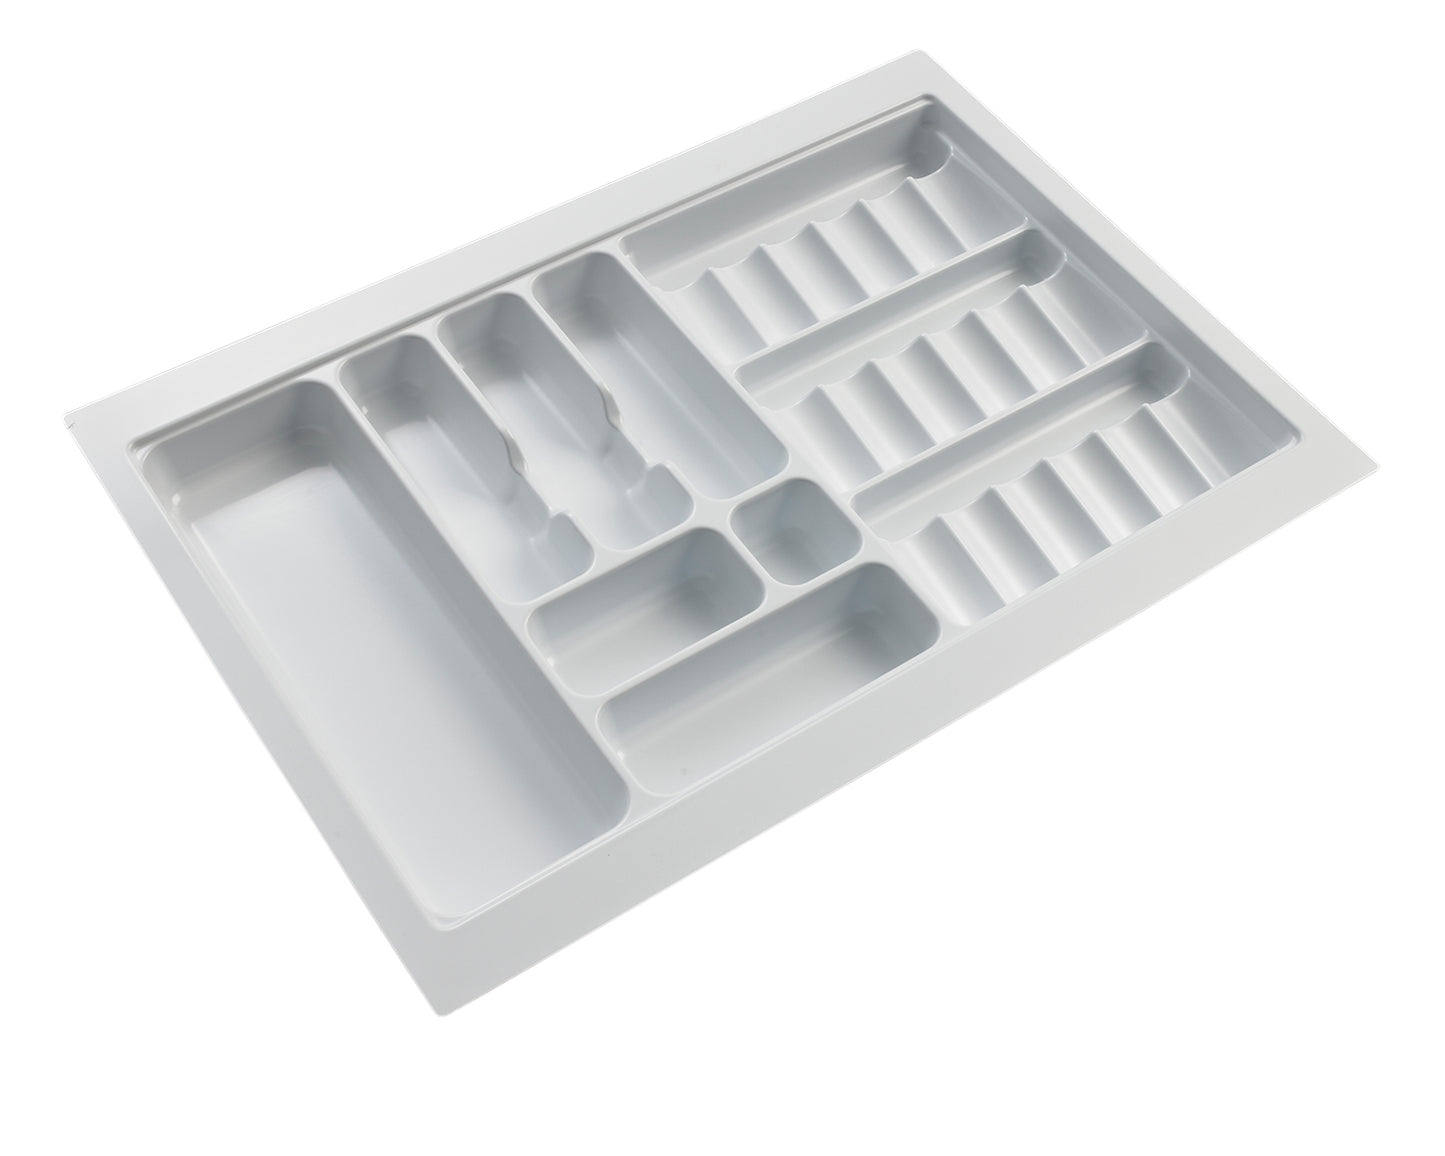 Cutlery Tray - Spice Rack 800 White